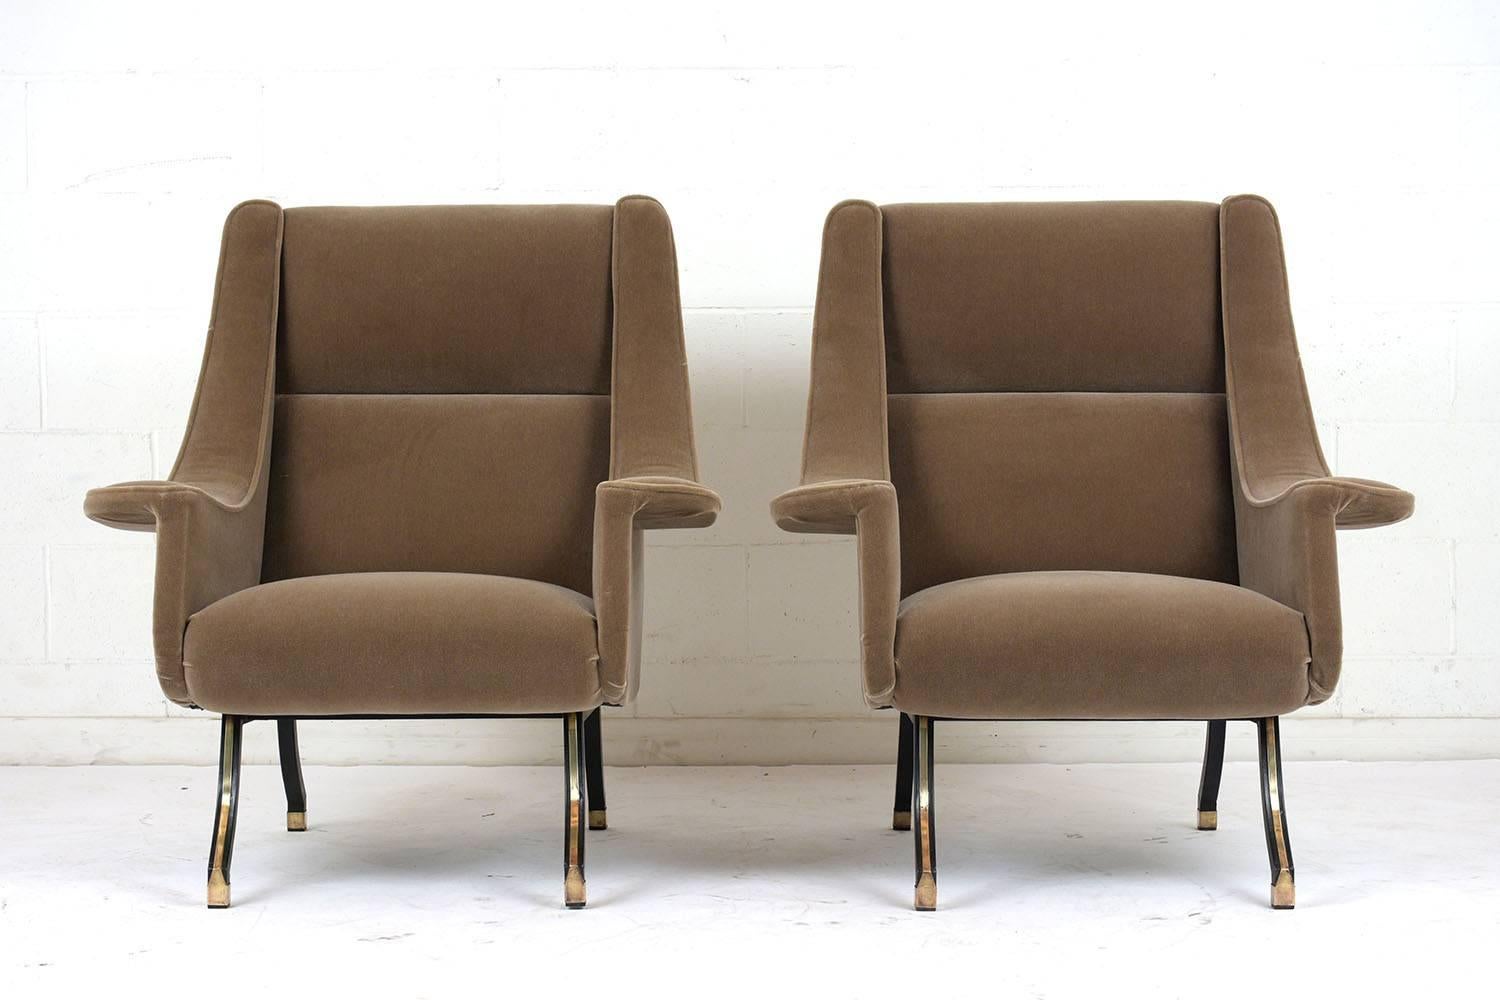 This pair of 1960s Mid-Century Modern style lounge chairs have been completely restored. The chairs have a curved profile with ski slope arm rests. The comfortable seats have been professionally reupholstered in a tan color mohair fabric with single